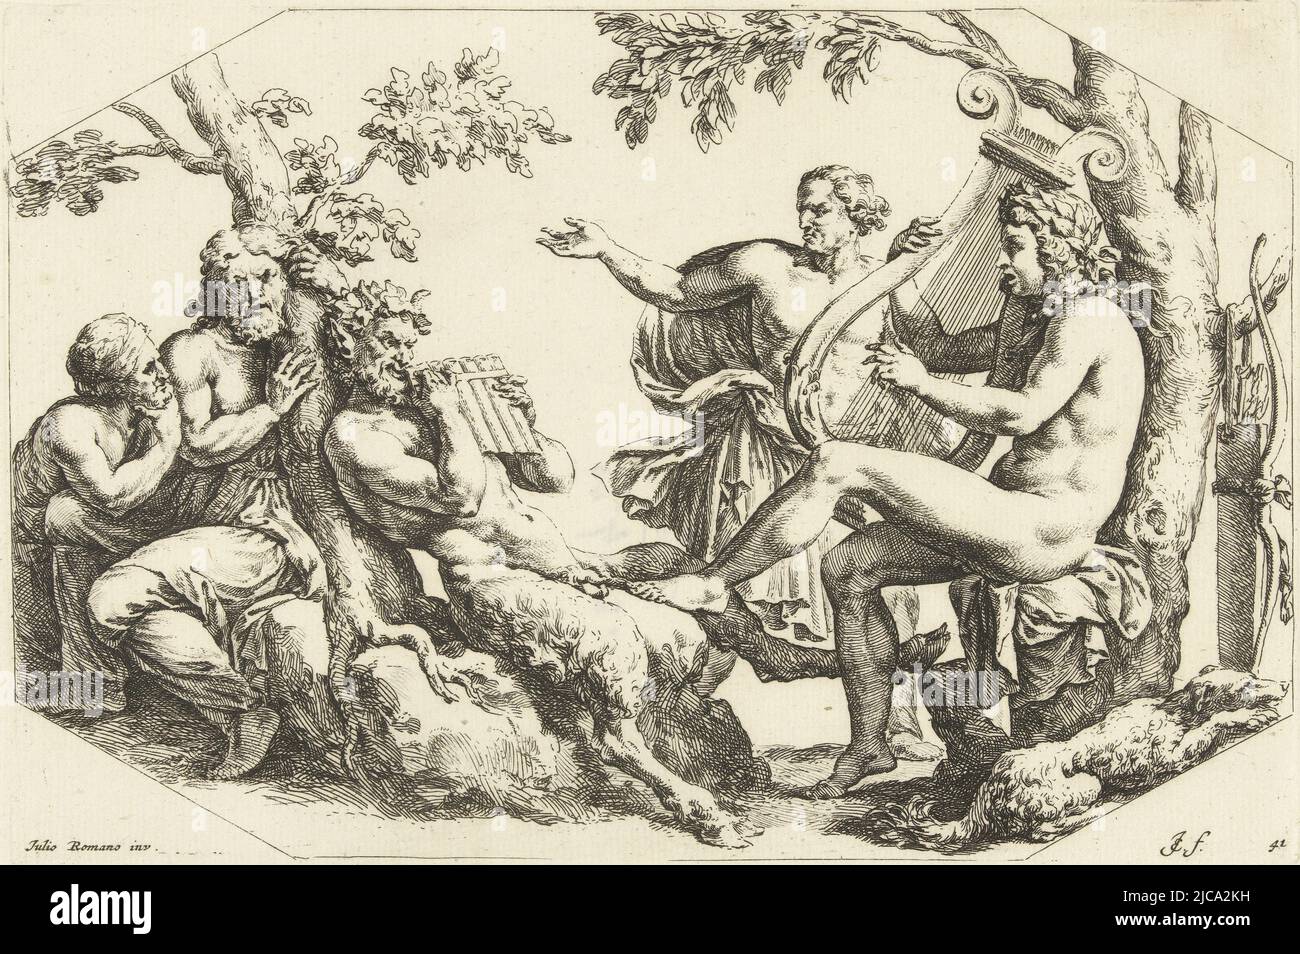 The god Apollo and the satyr Pan compete in a musical contest Pan plays a pan flute and Apollo his lyre On the left are two listeners and behind the participants is an umpire, The Contest between Apollo and Pan Music contest between Apollo and Pan Paradigmata graphices variorum artificum , print maker: Jan de Bisschop, (mentioned on object), Giulio Romano, (mentioned on object), Northern Netherlands, 1668 - 1671, paper, etching, h 156 mm × w 225 mm Stock Photo